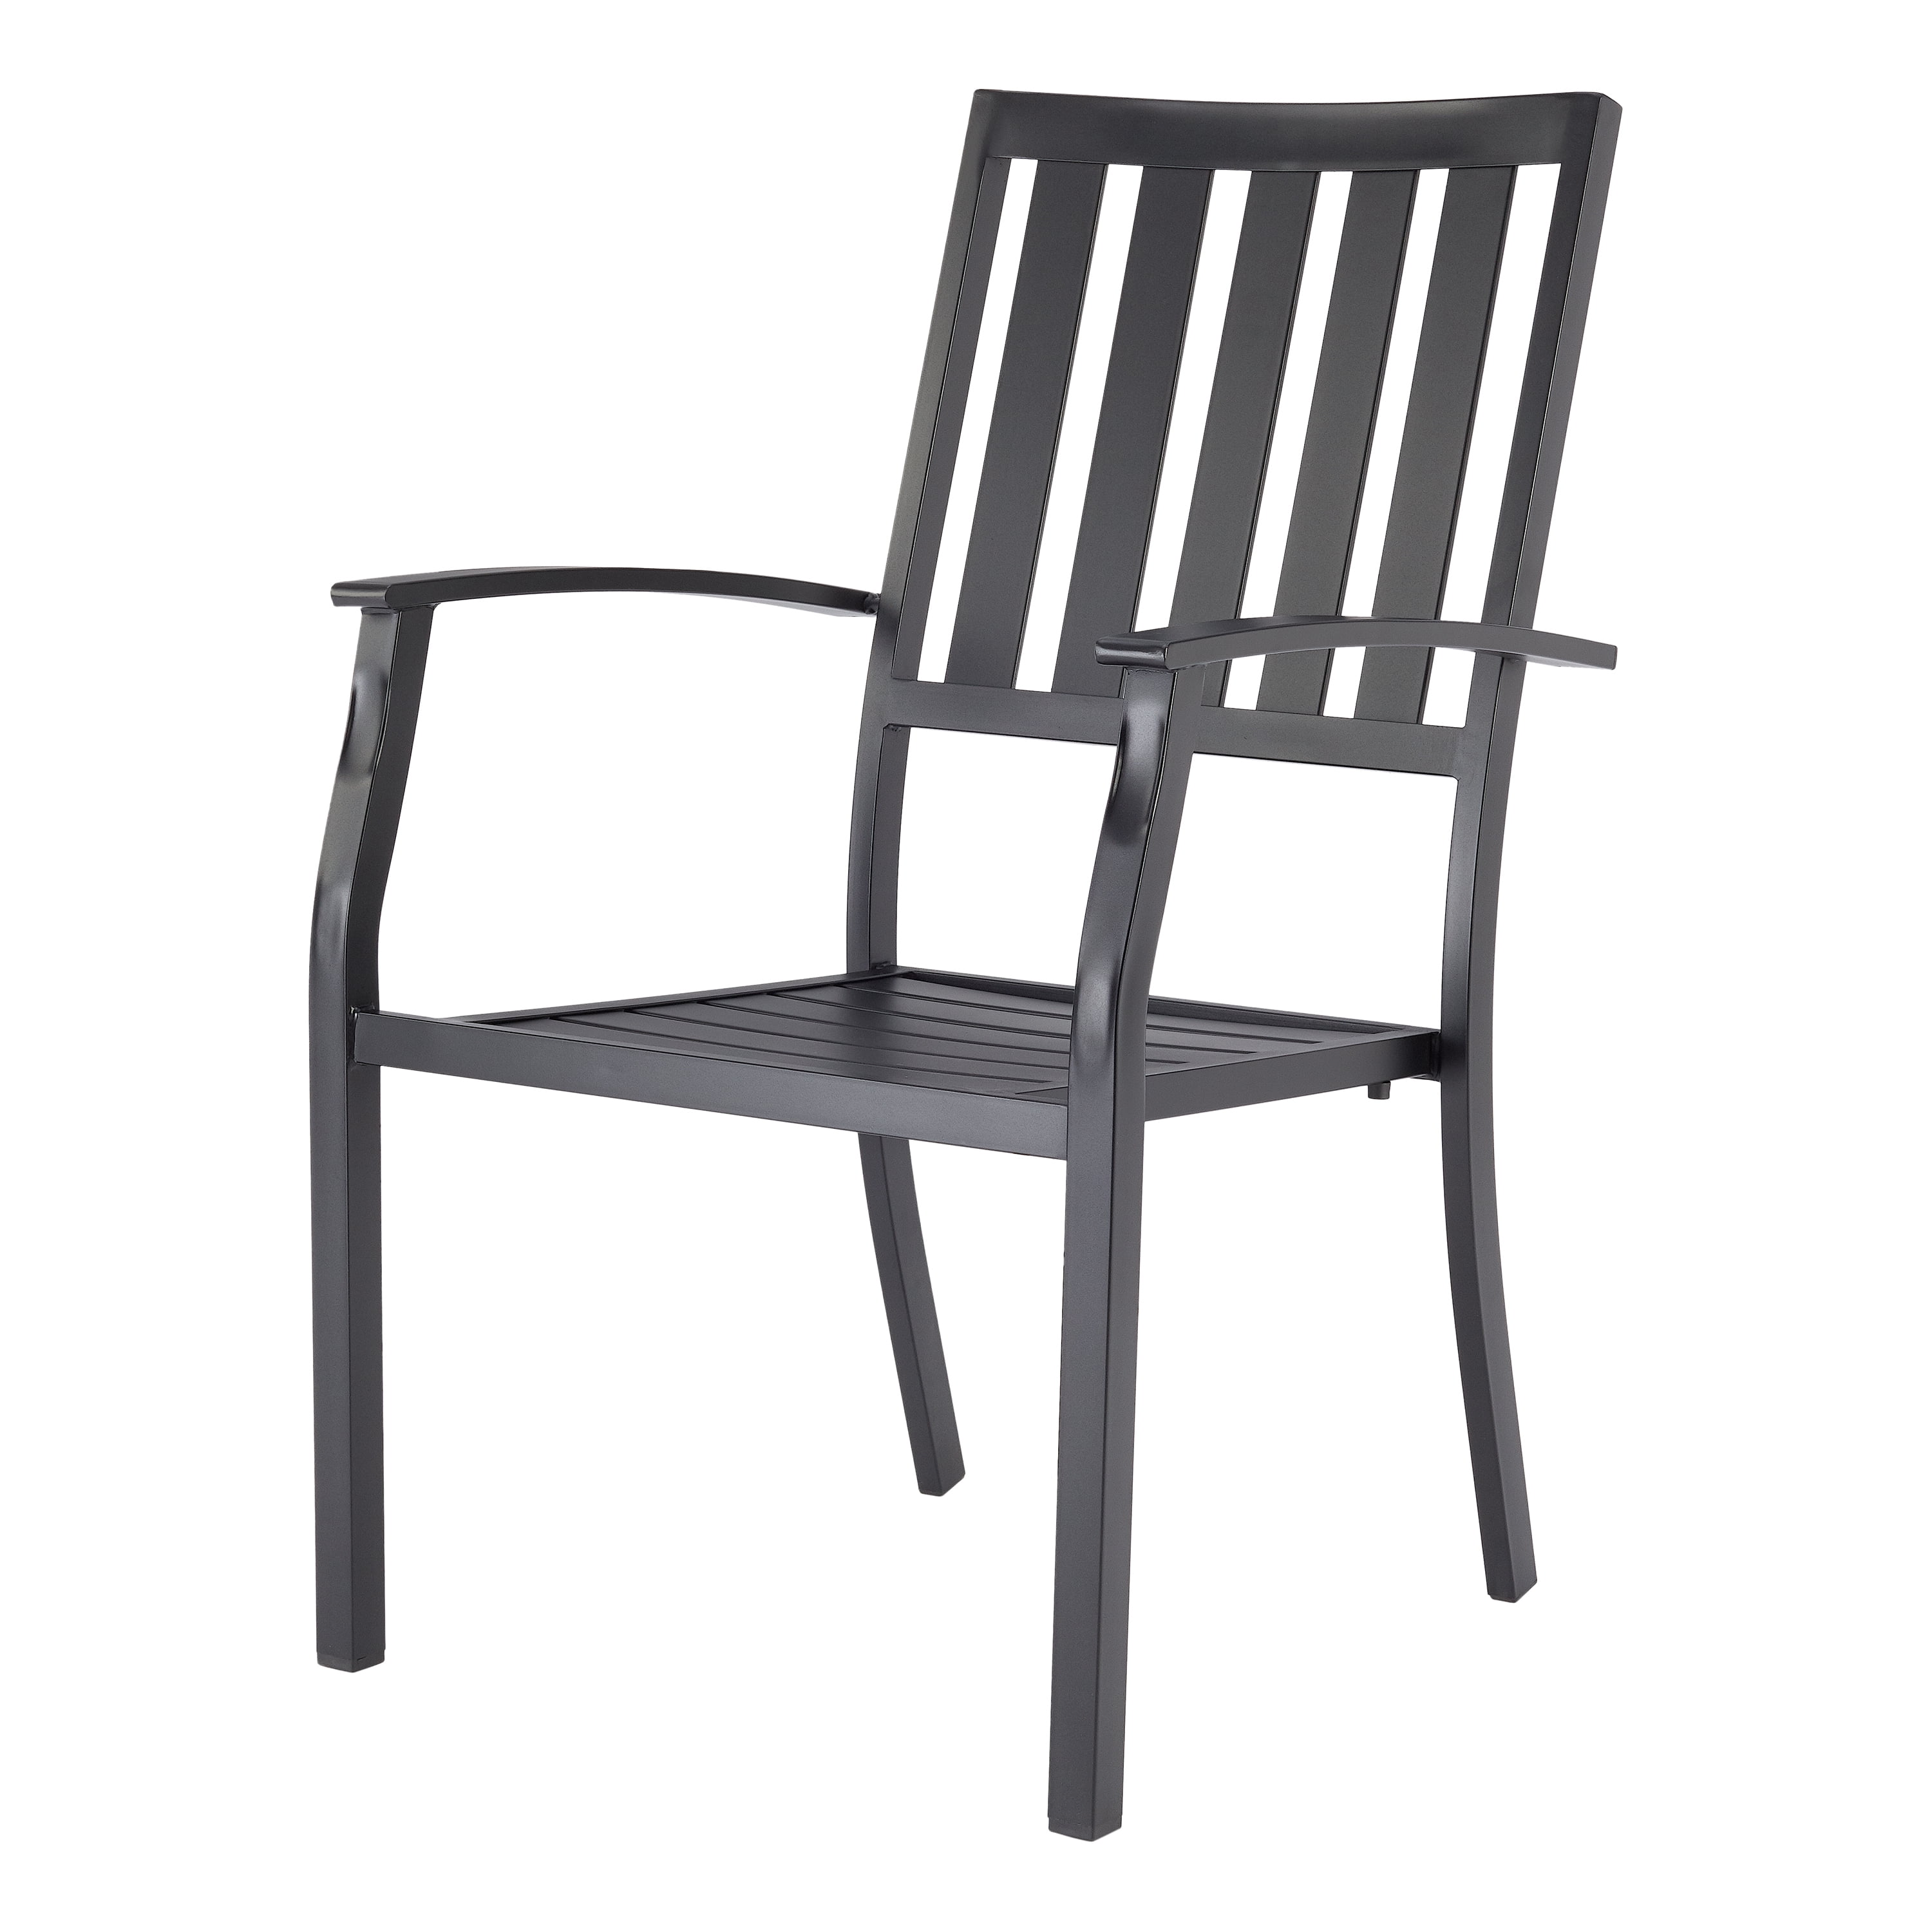 Outdoor Metal Patio Dining Chairs